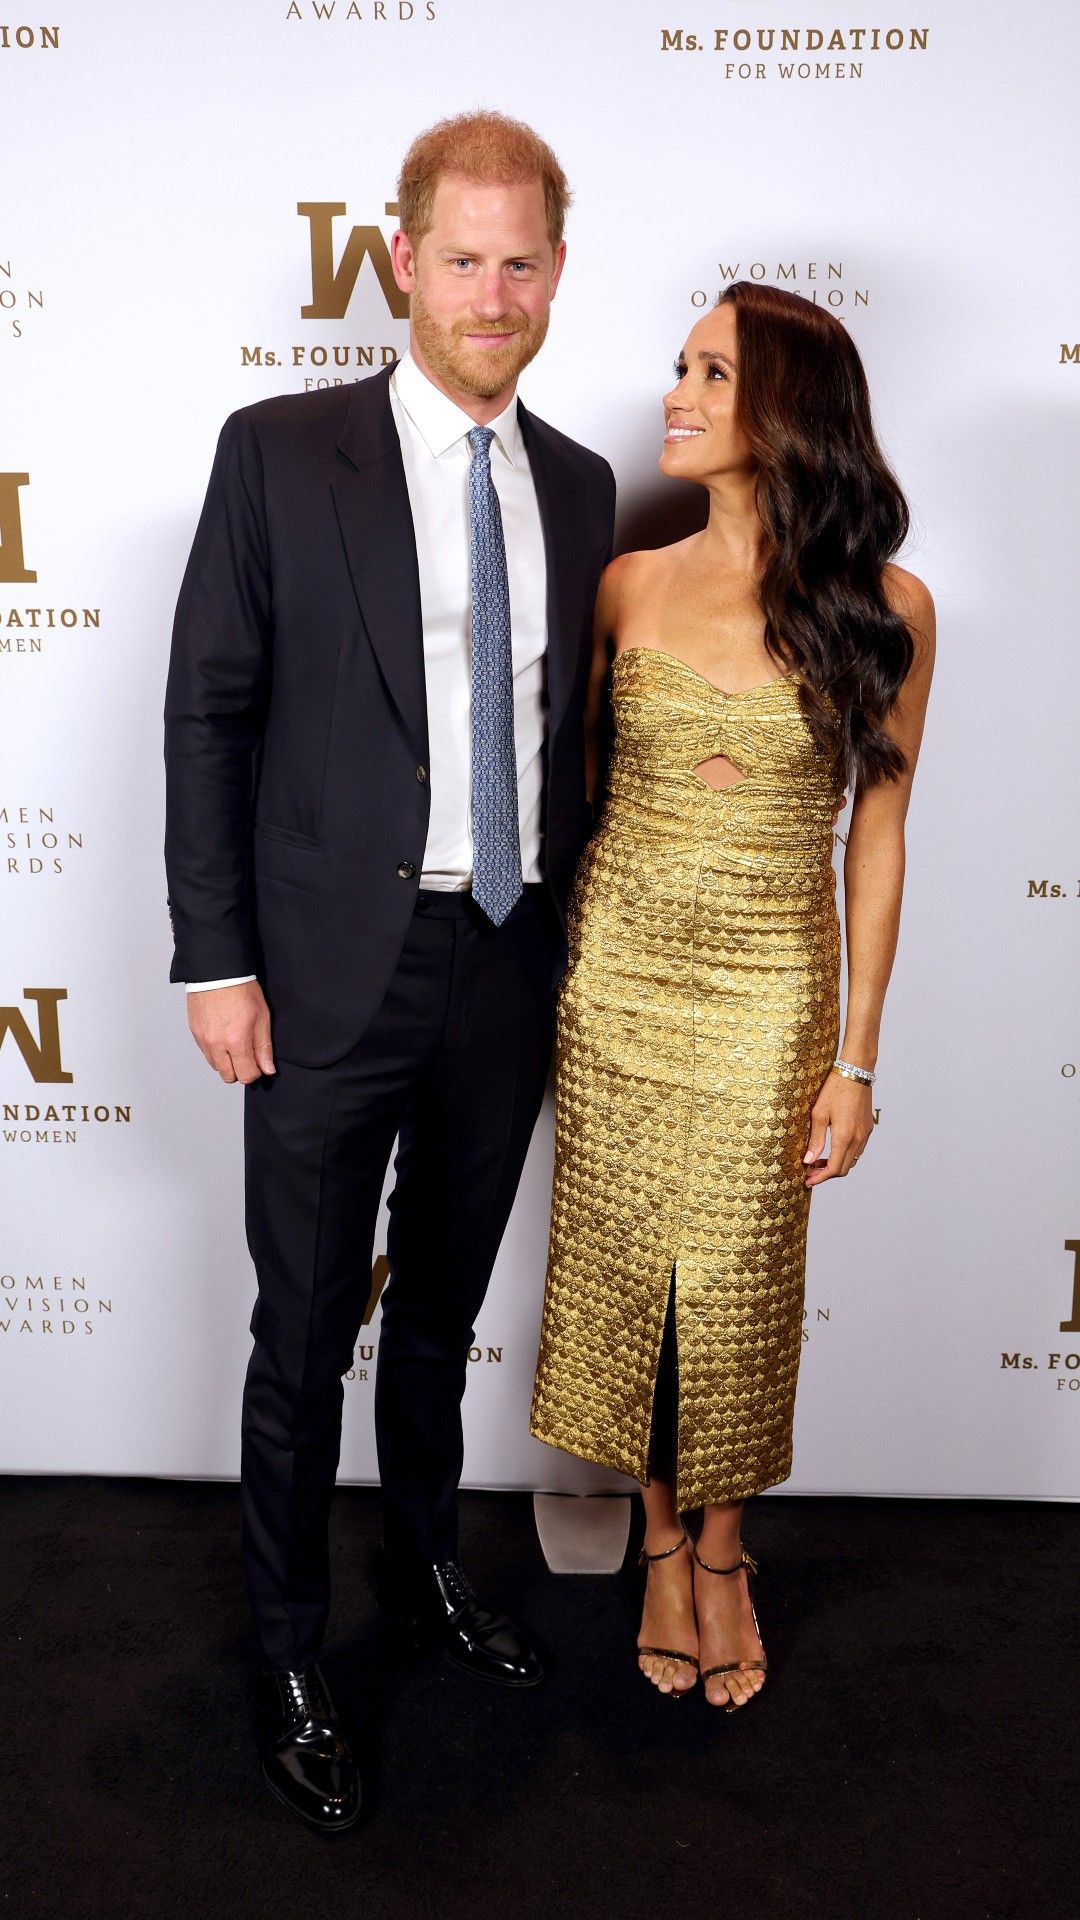 <p>                     Meghan Markle was the guest of honour for the Ms Foundation awards in Manhattan in May 2023.                   </p>                                      <p>                     While Meghan sparkled in a strapless, golden Johanna Ortiz ensemble with a matching Carolina Herrera clutch bag, Harry beamed with pride as he watched his wife pick up the 2023 Women of Vision Award.                   </p>